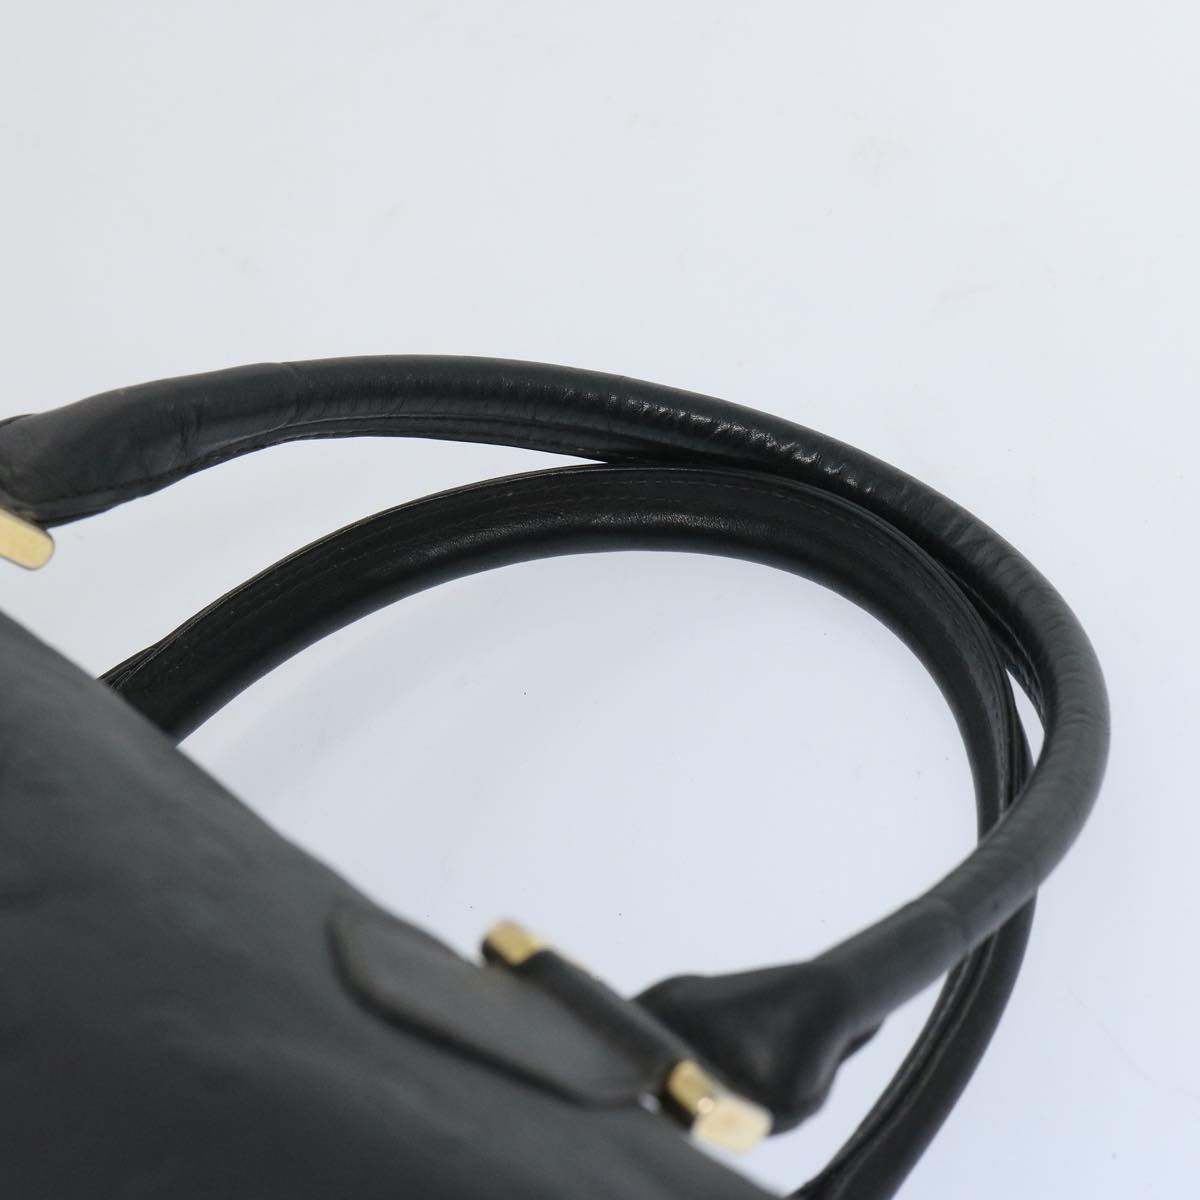 VALENTINO Hand Bag Leather Black Auth bs12115